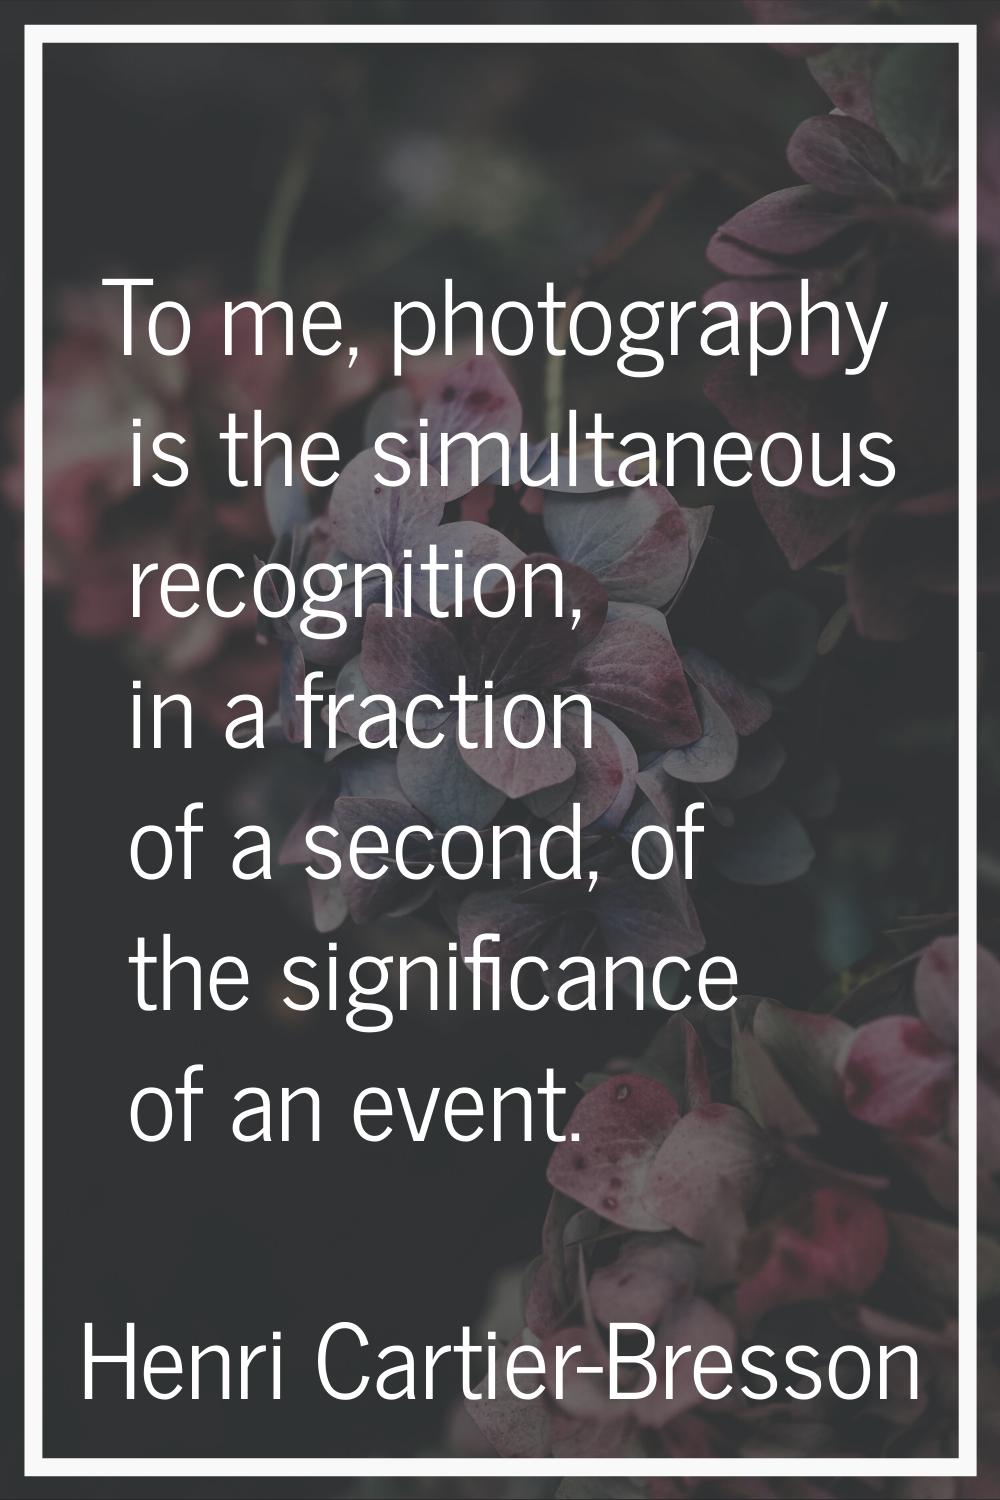 To me, photography is the simultaneous recognition, in a fraction of a second, of the significance 